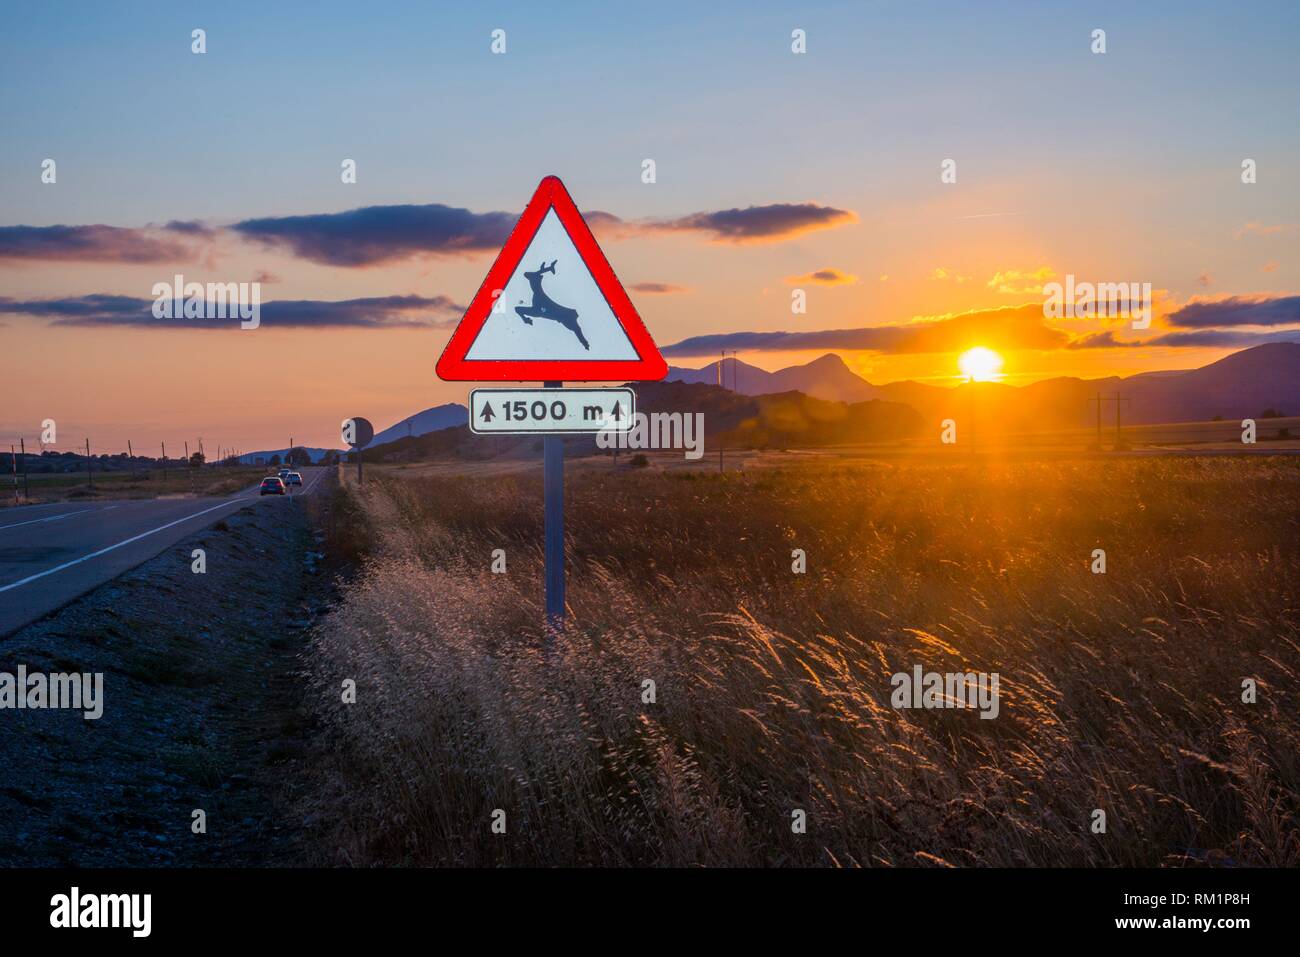 Wild animals traffic sign, byway and sunset landscape. Montaña Palentina, Spain. Stock Photo